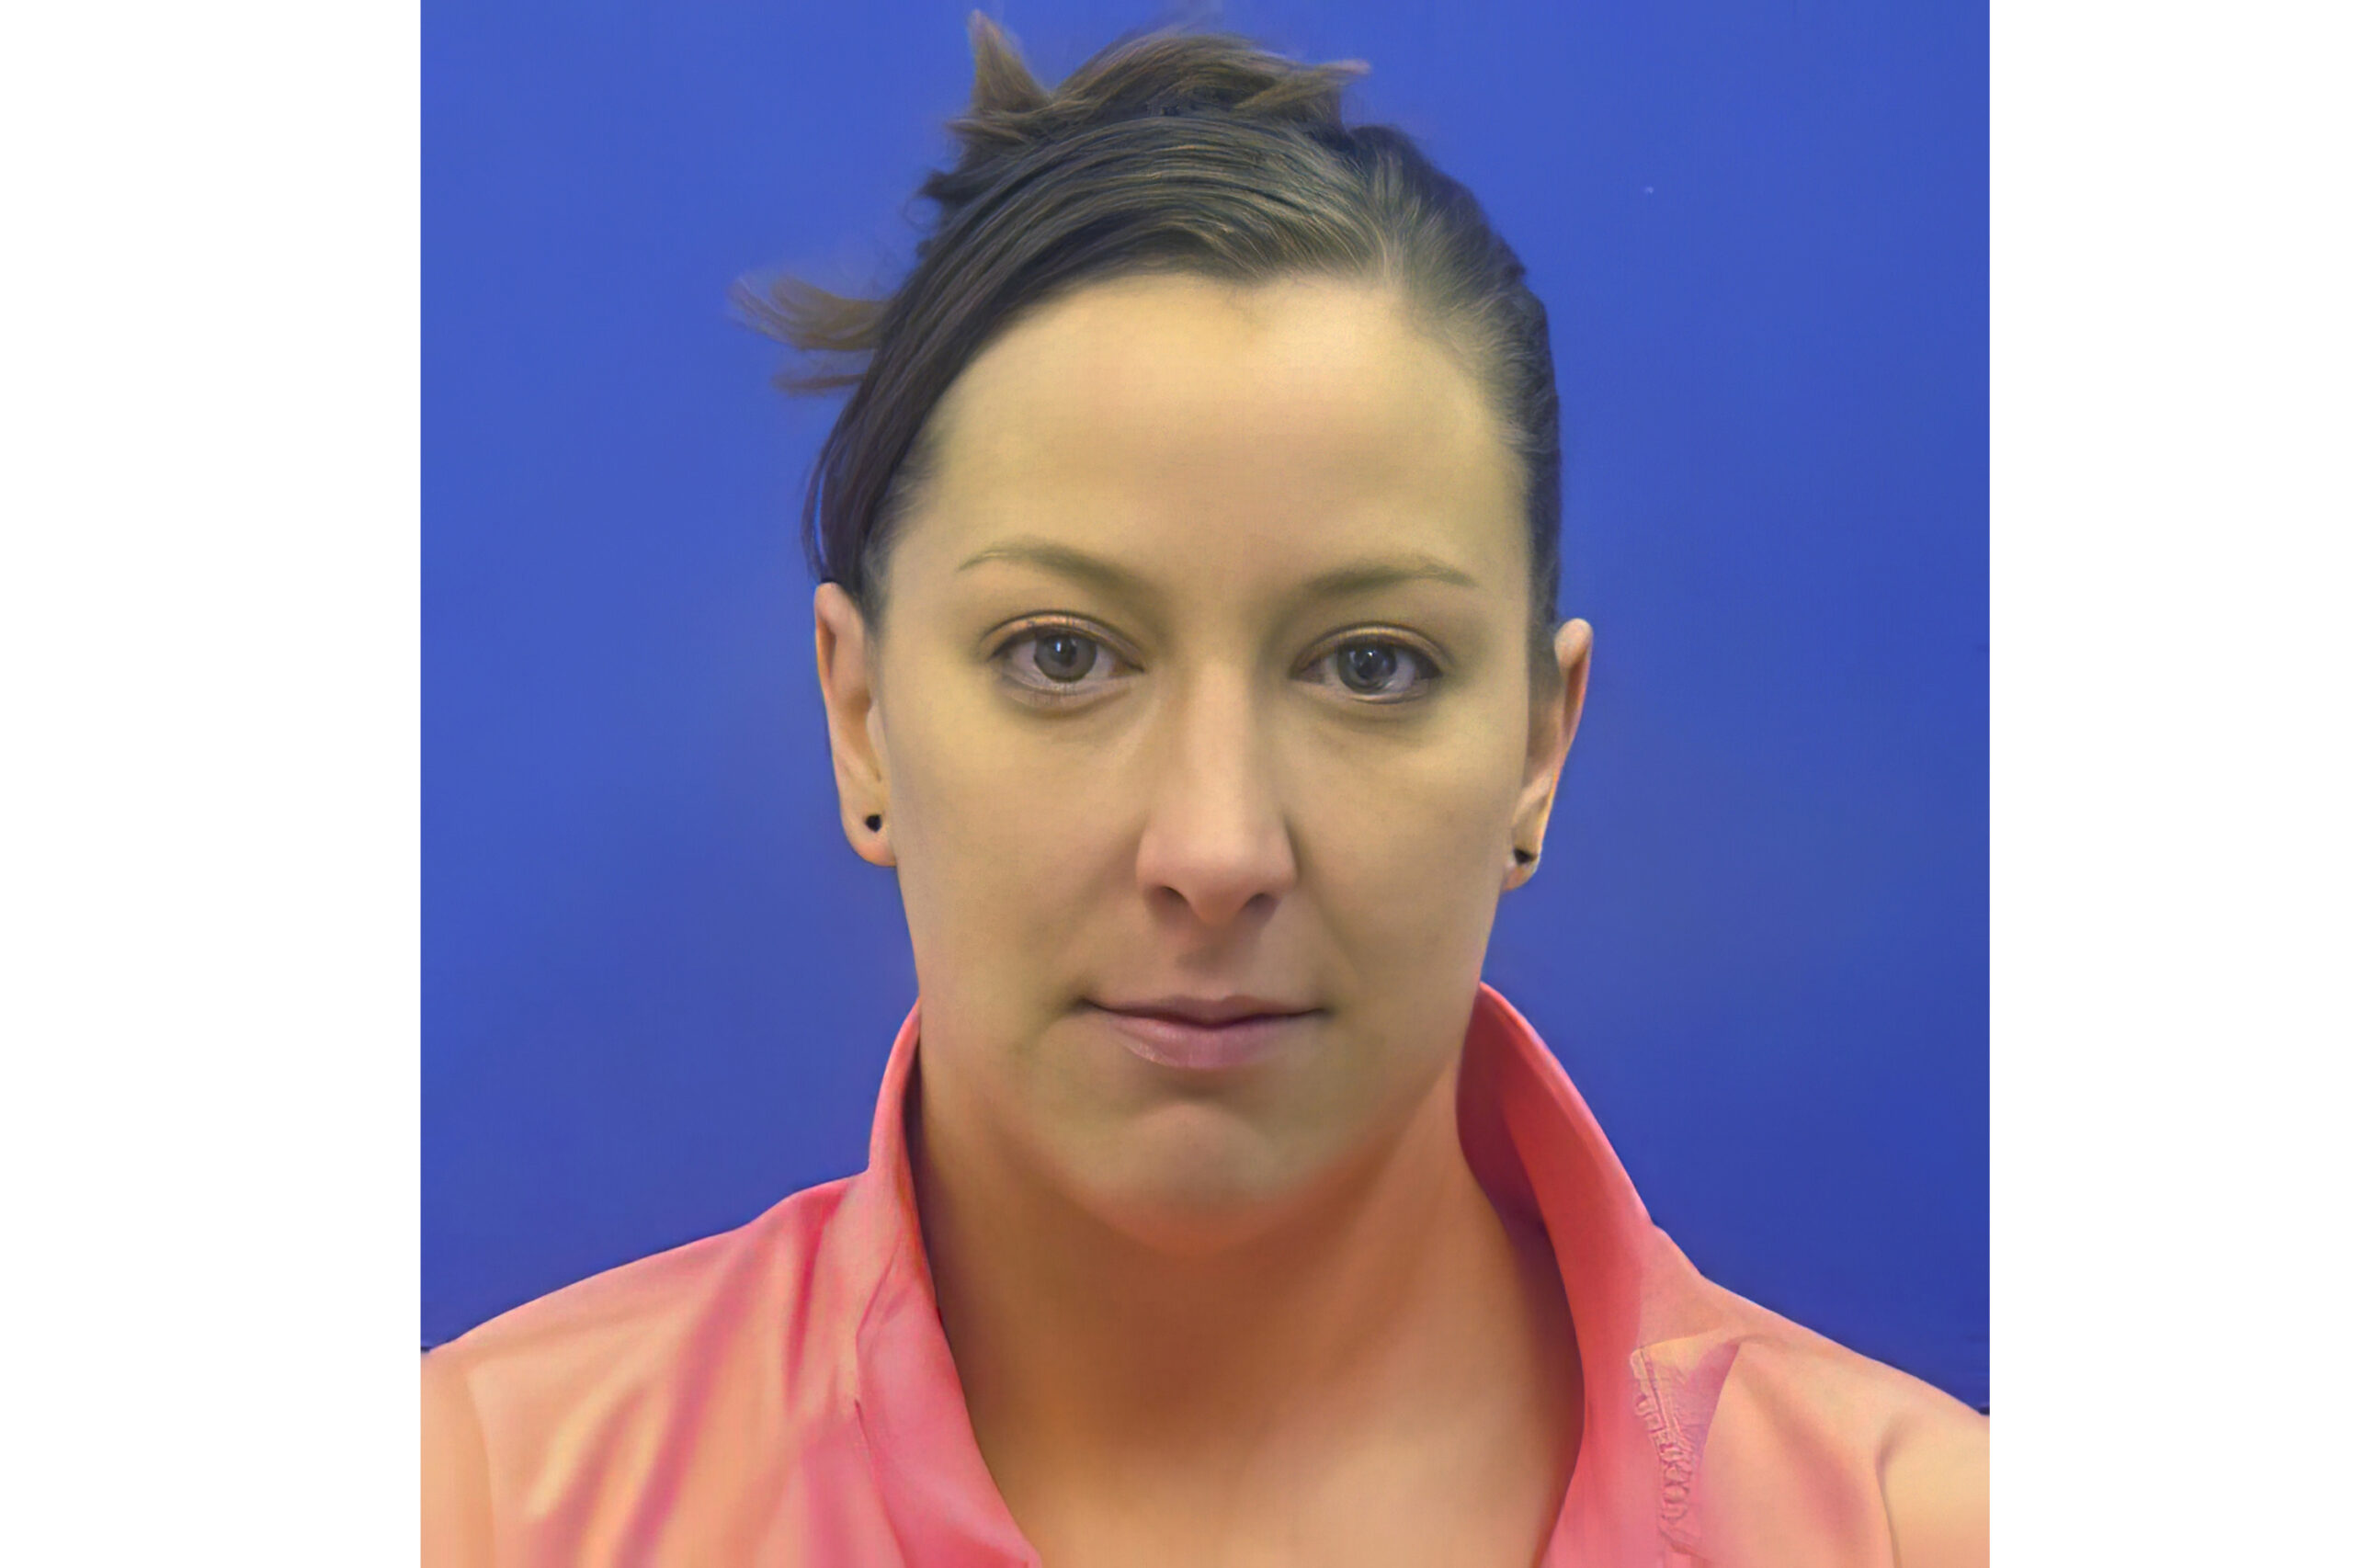 This driver's license photo from the Maryland Motor Vehicle Administration (MVA), provided to AP by the Calvert County Sheriff's Office, shows Ashli Babbitt. (Maryland MVA/Courtesy of the Calvert County Sheriff's Office via AP)